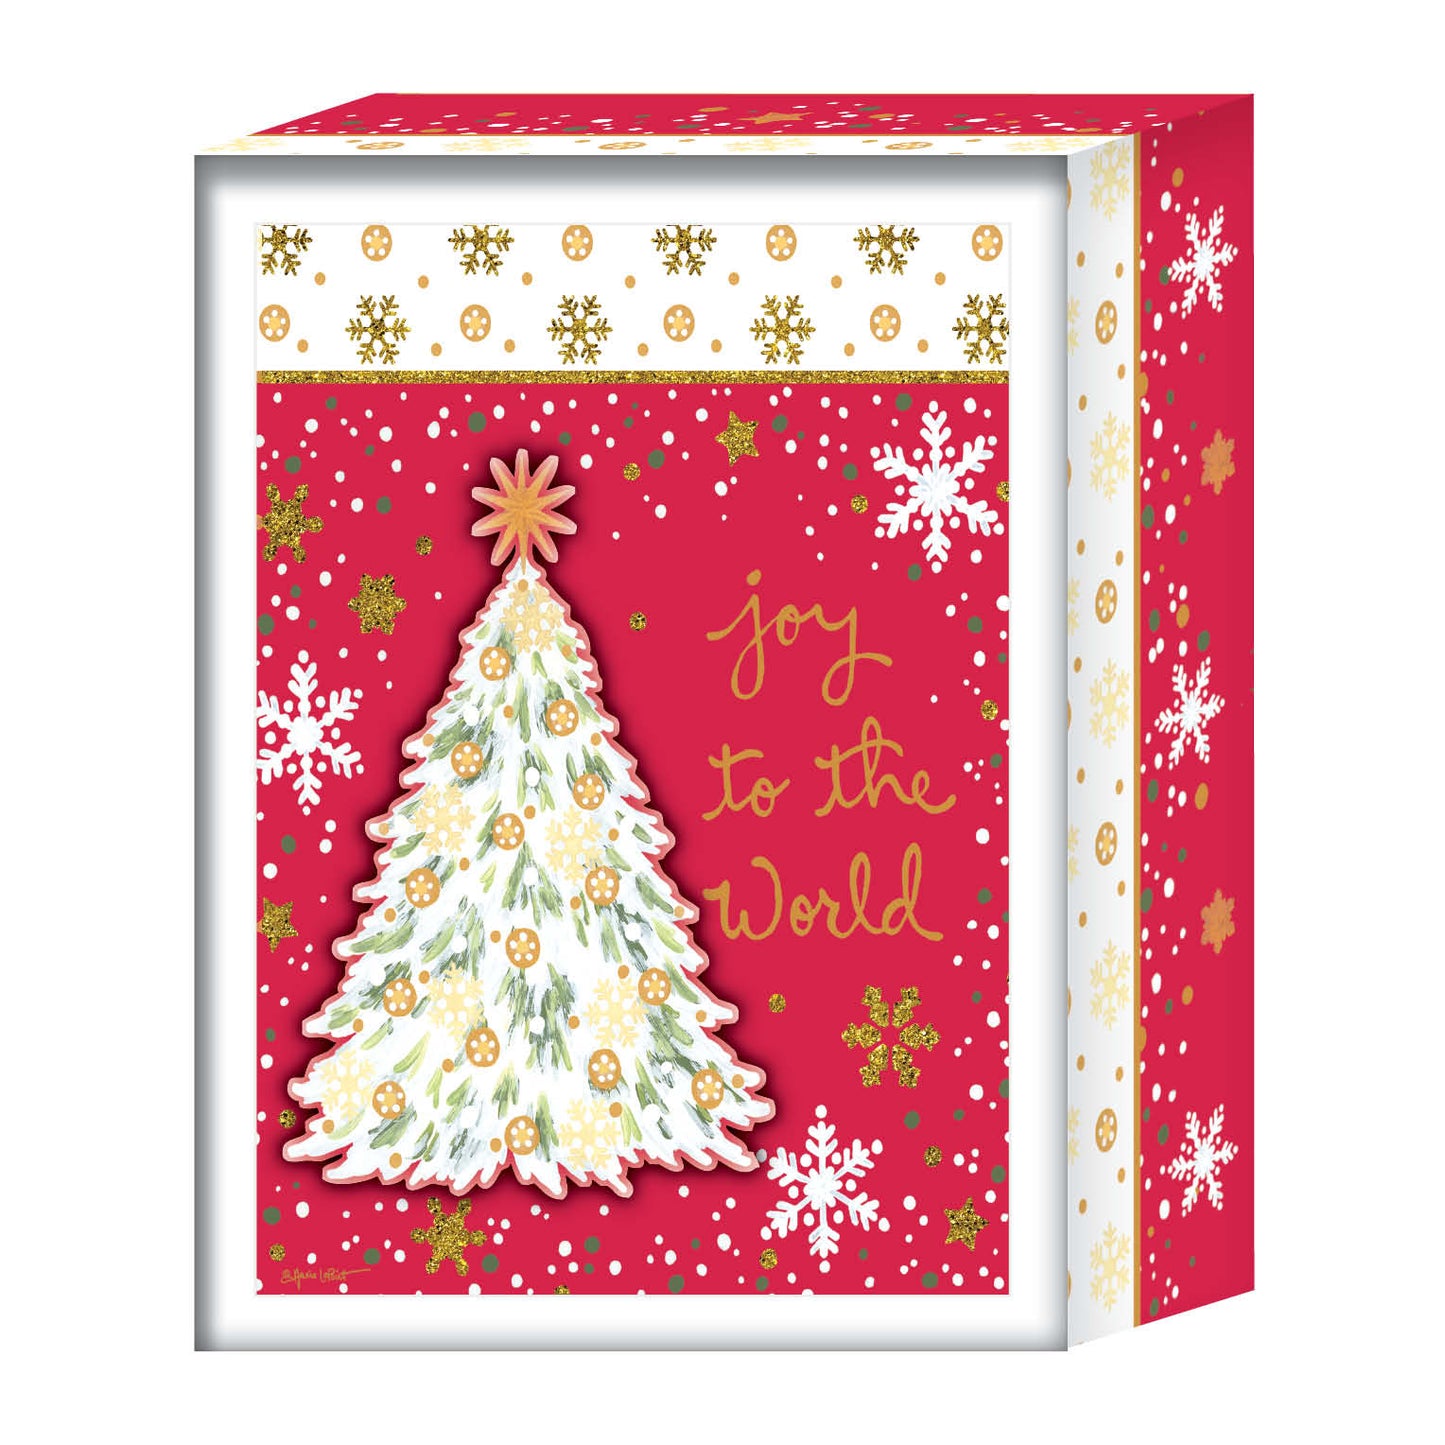 Silent Night Tree - Boxed Christmas Cards -15 Cards & Envelopes